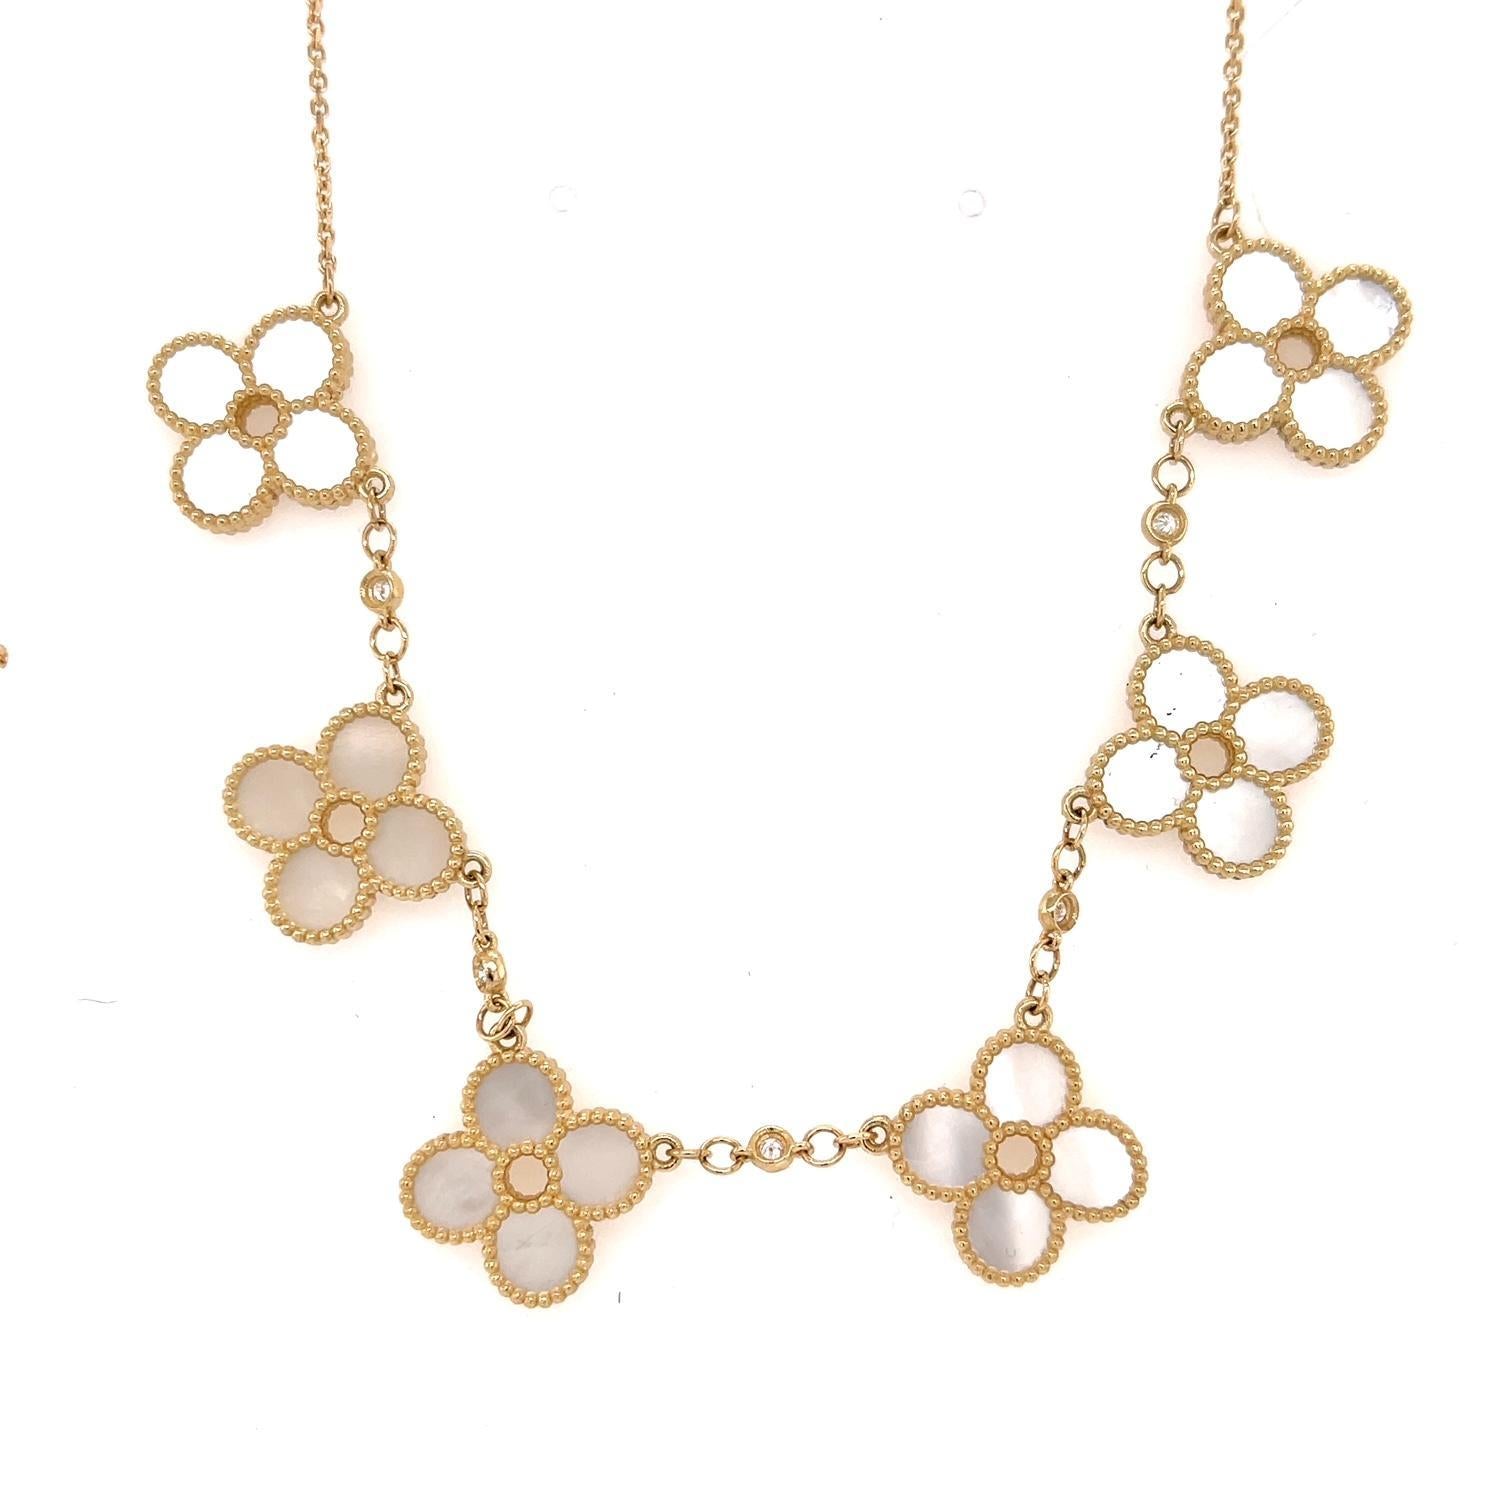 Capture the fleeting beauty of a flower with this fun and feminine necklace.